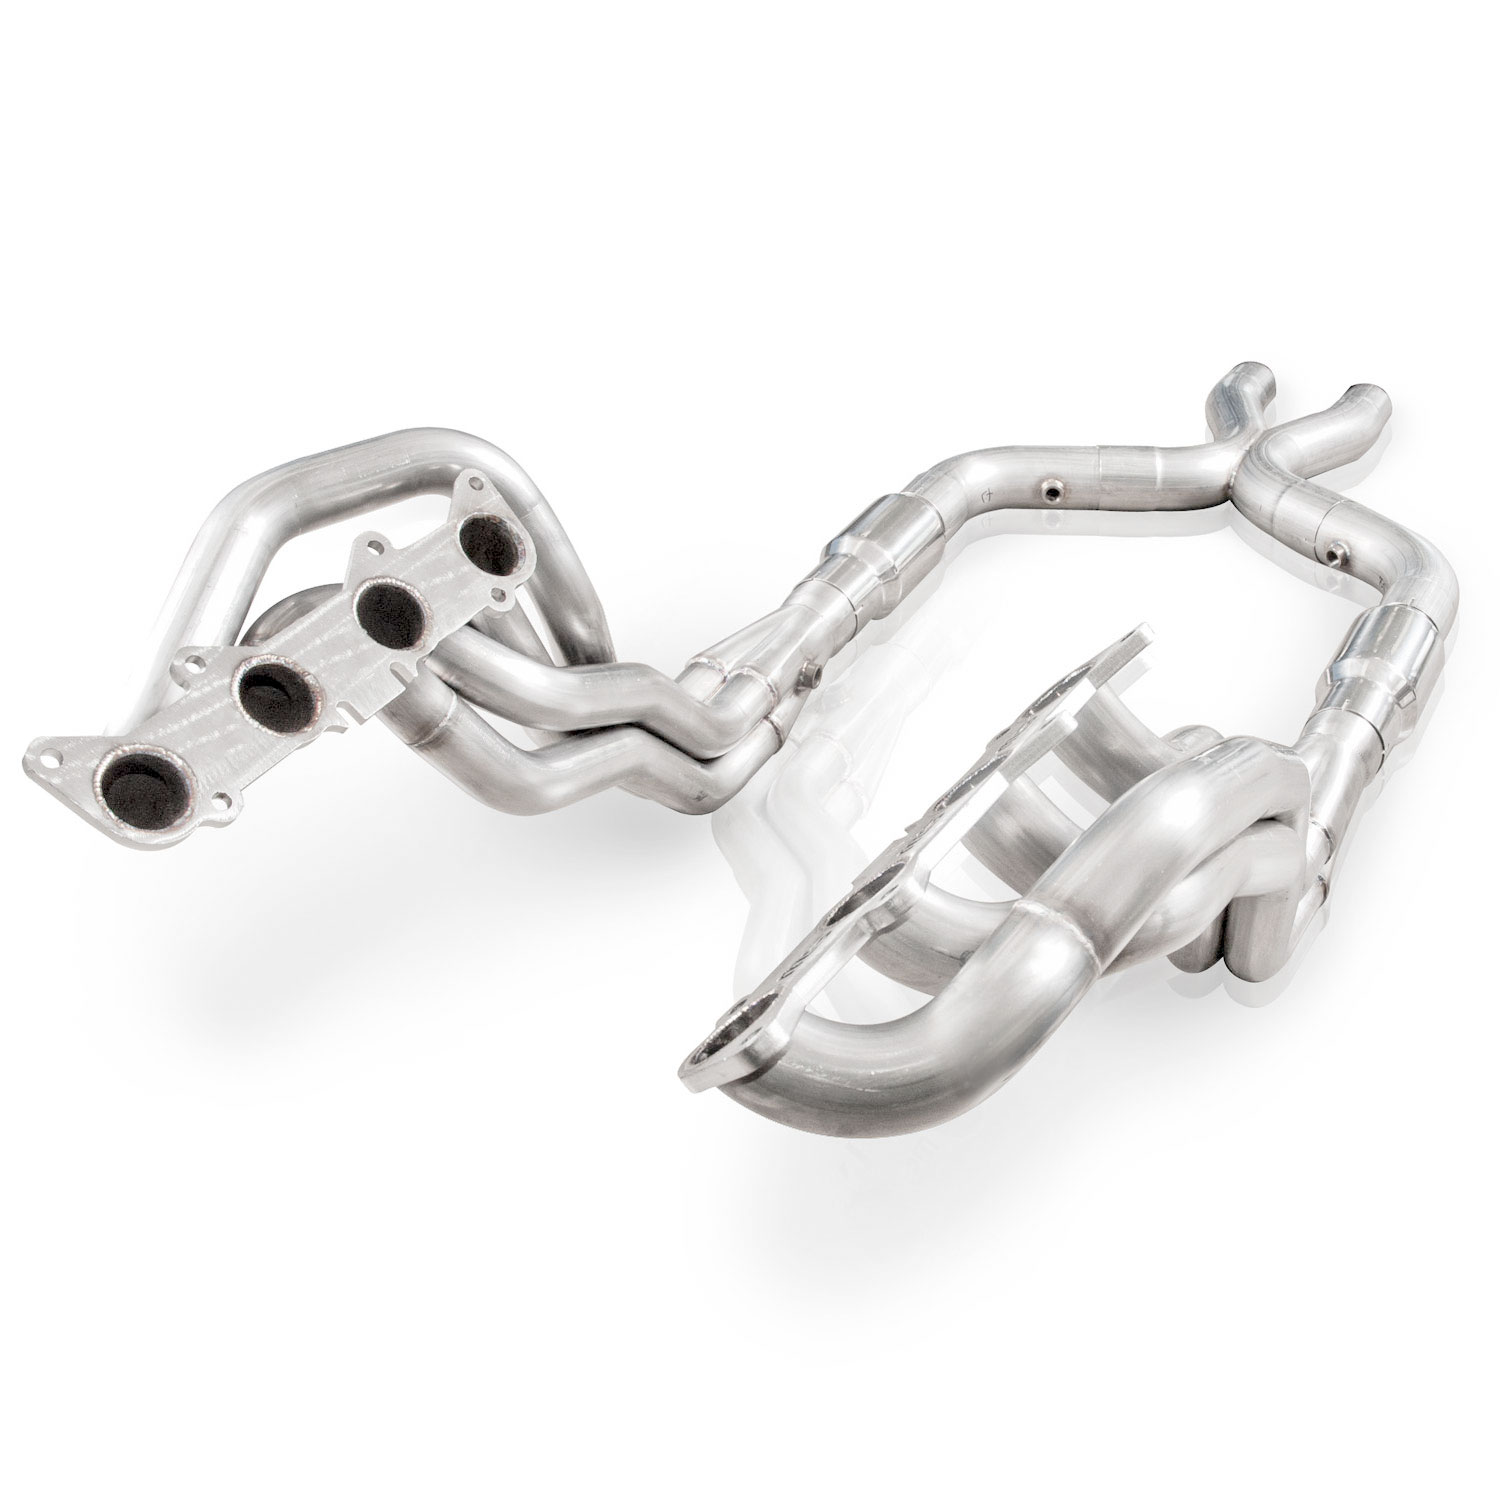 2011-2014 Mustang GT 5.0L Stainless Power Headers 1-7/8" With Catted Leads Performance Connect